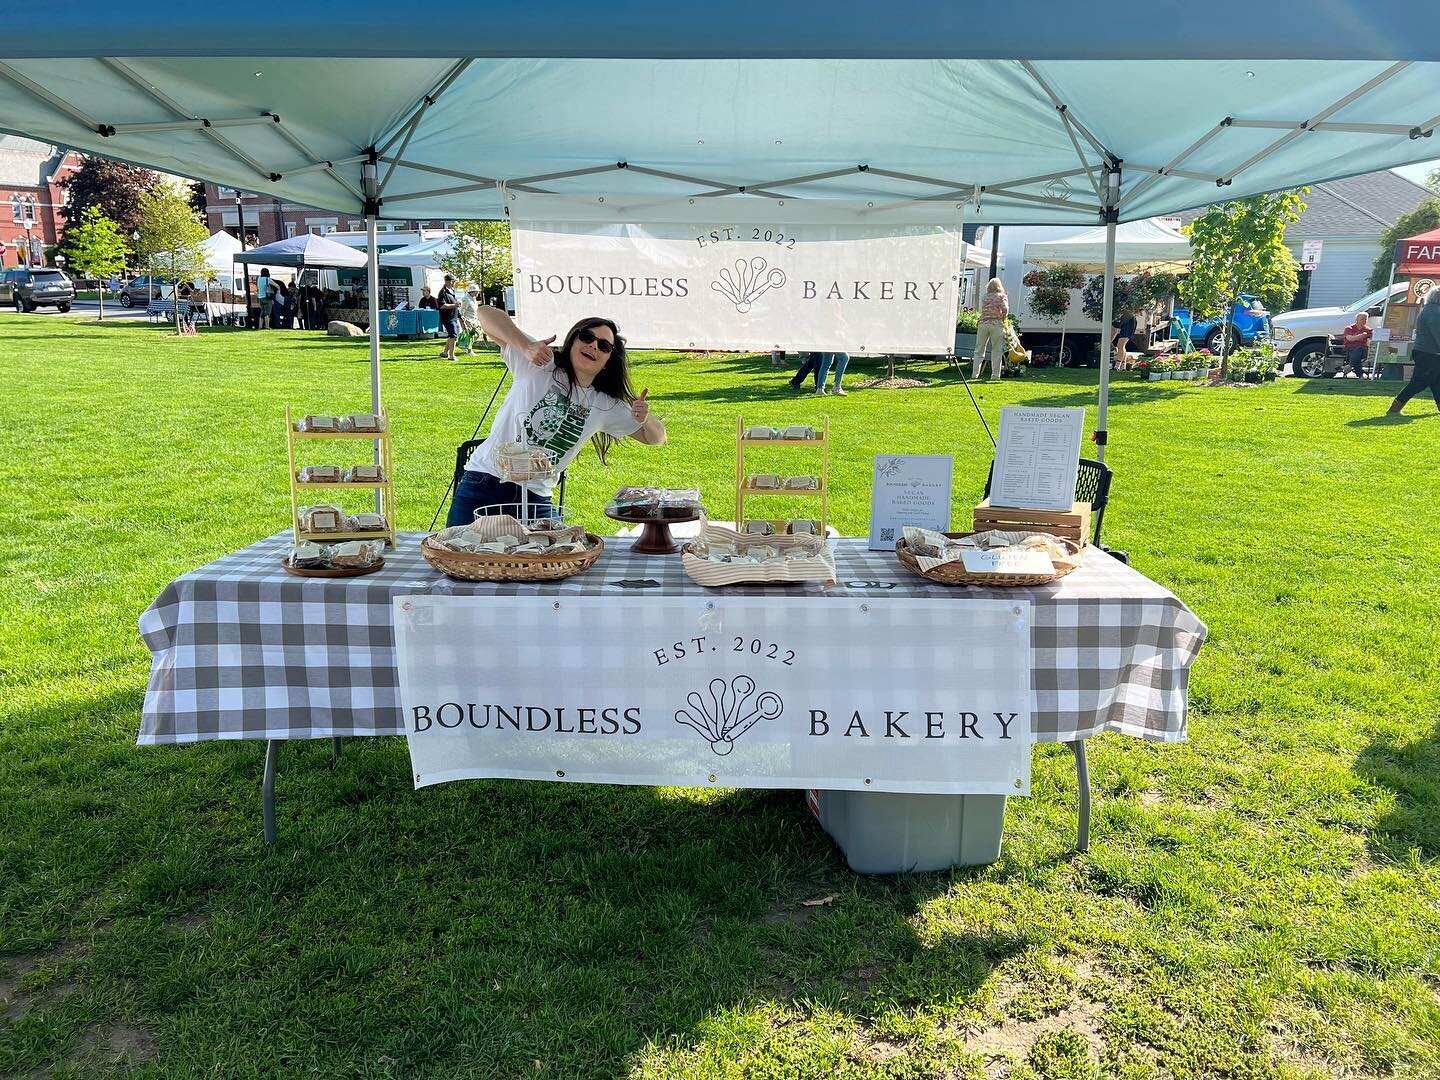 It&rsquo;s a beautiful day for a market! Stop by the Boundless Bakery table today from 9am-1pm at the Natick Commons to grab some last-minute vegan goodies for Mom, or stock up your own pantry for the week! We have muffins for your mornings, fruit ba